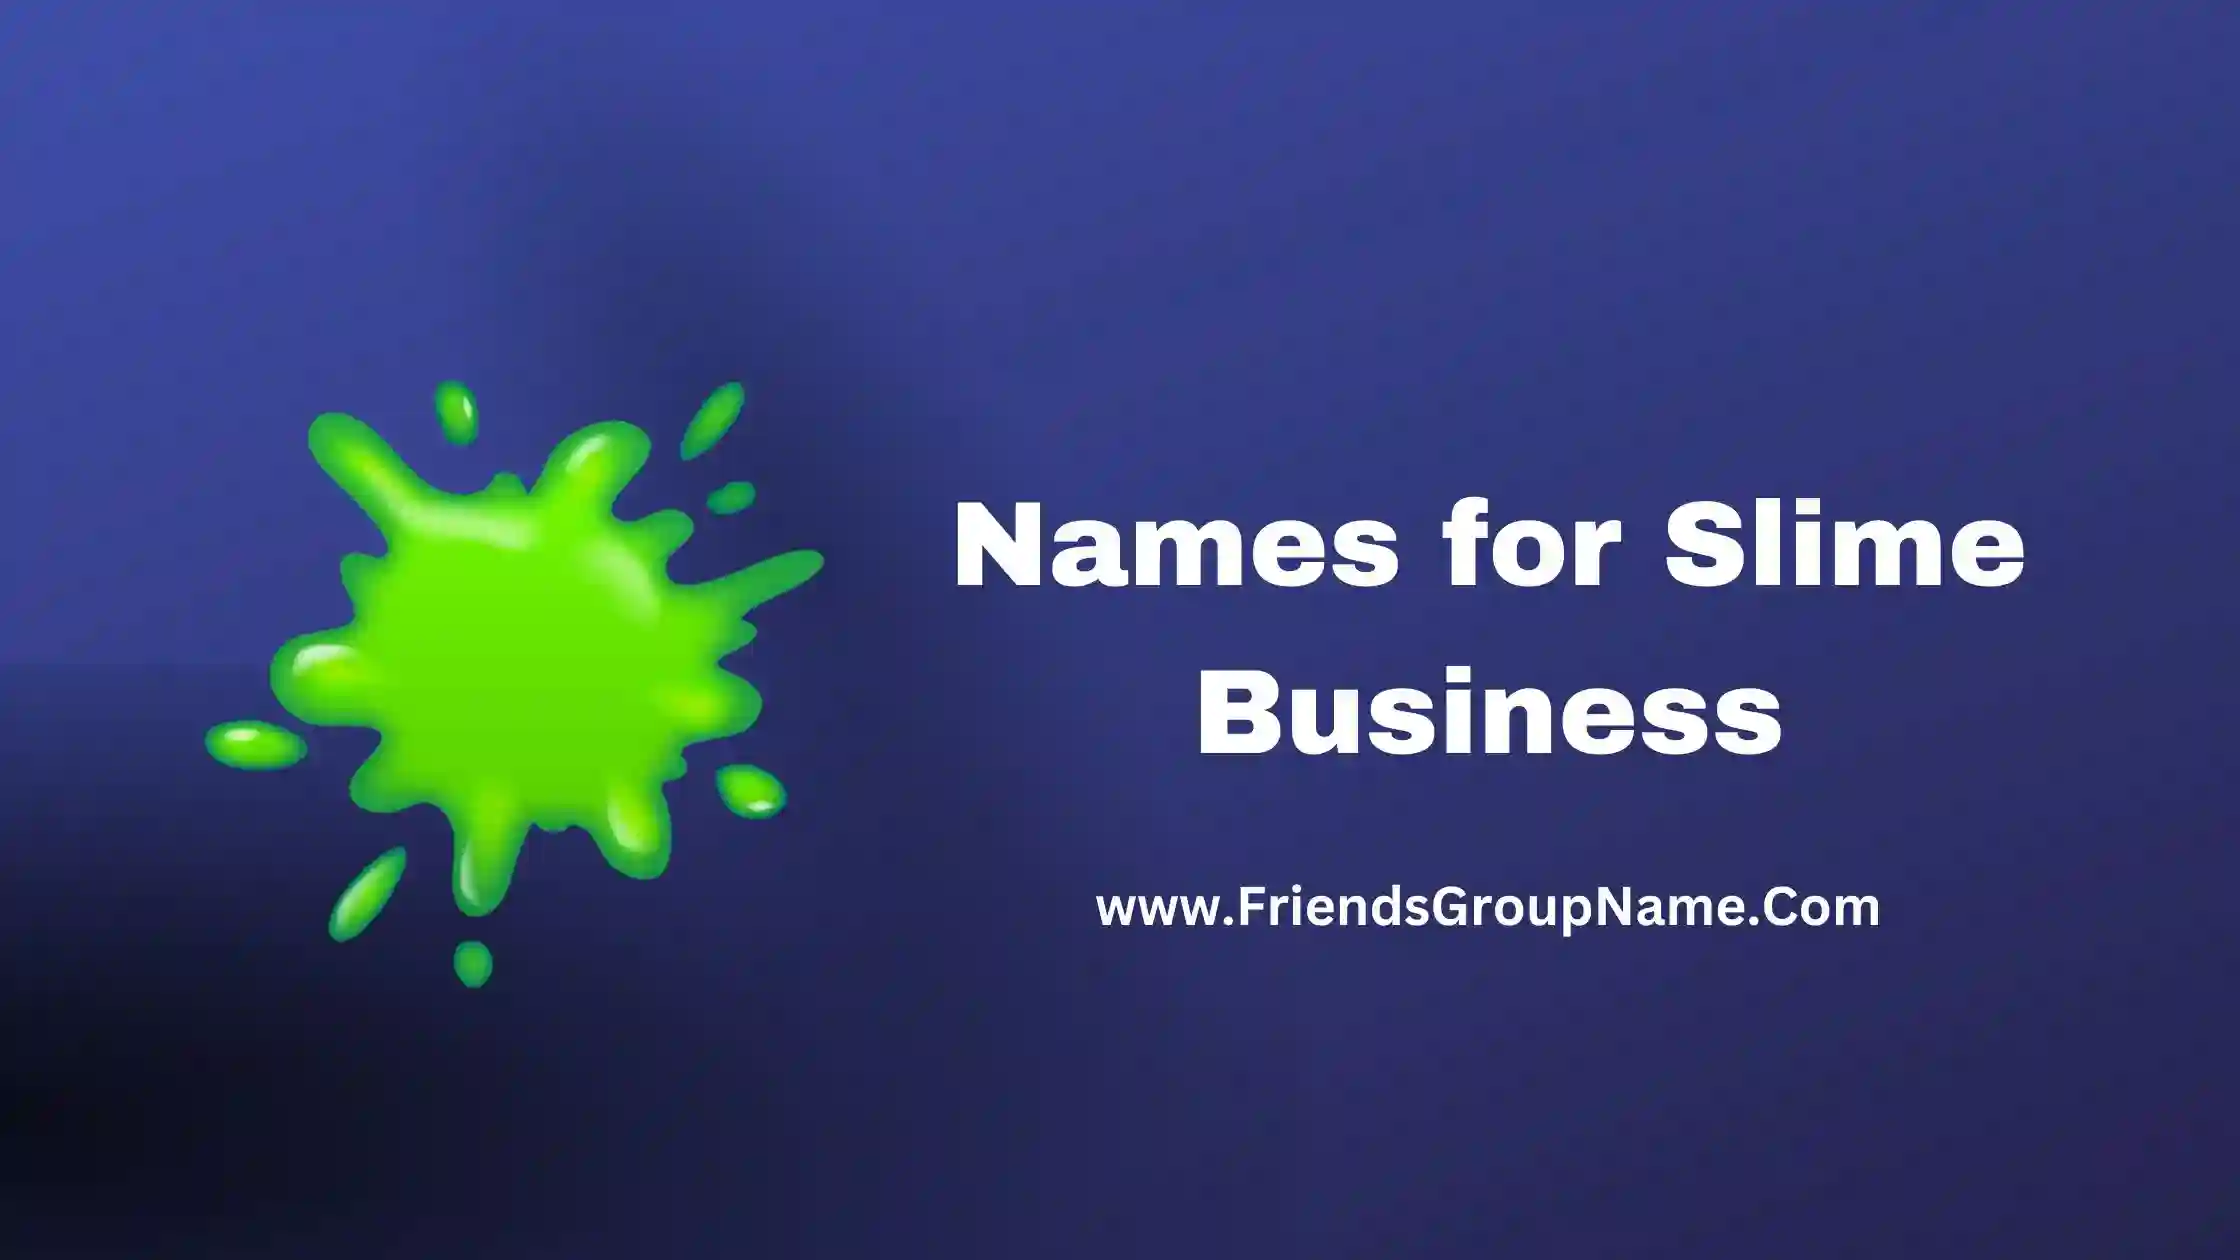 Names for Slime Business